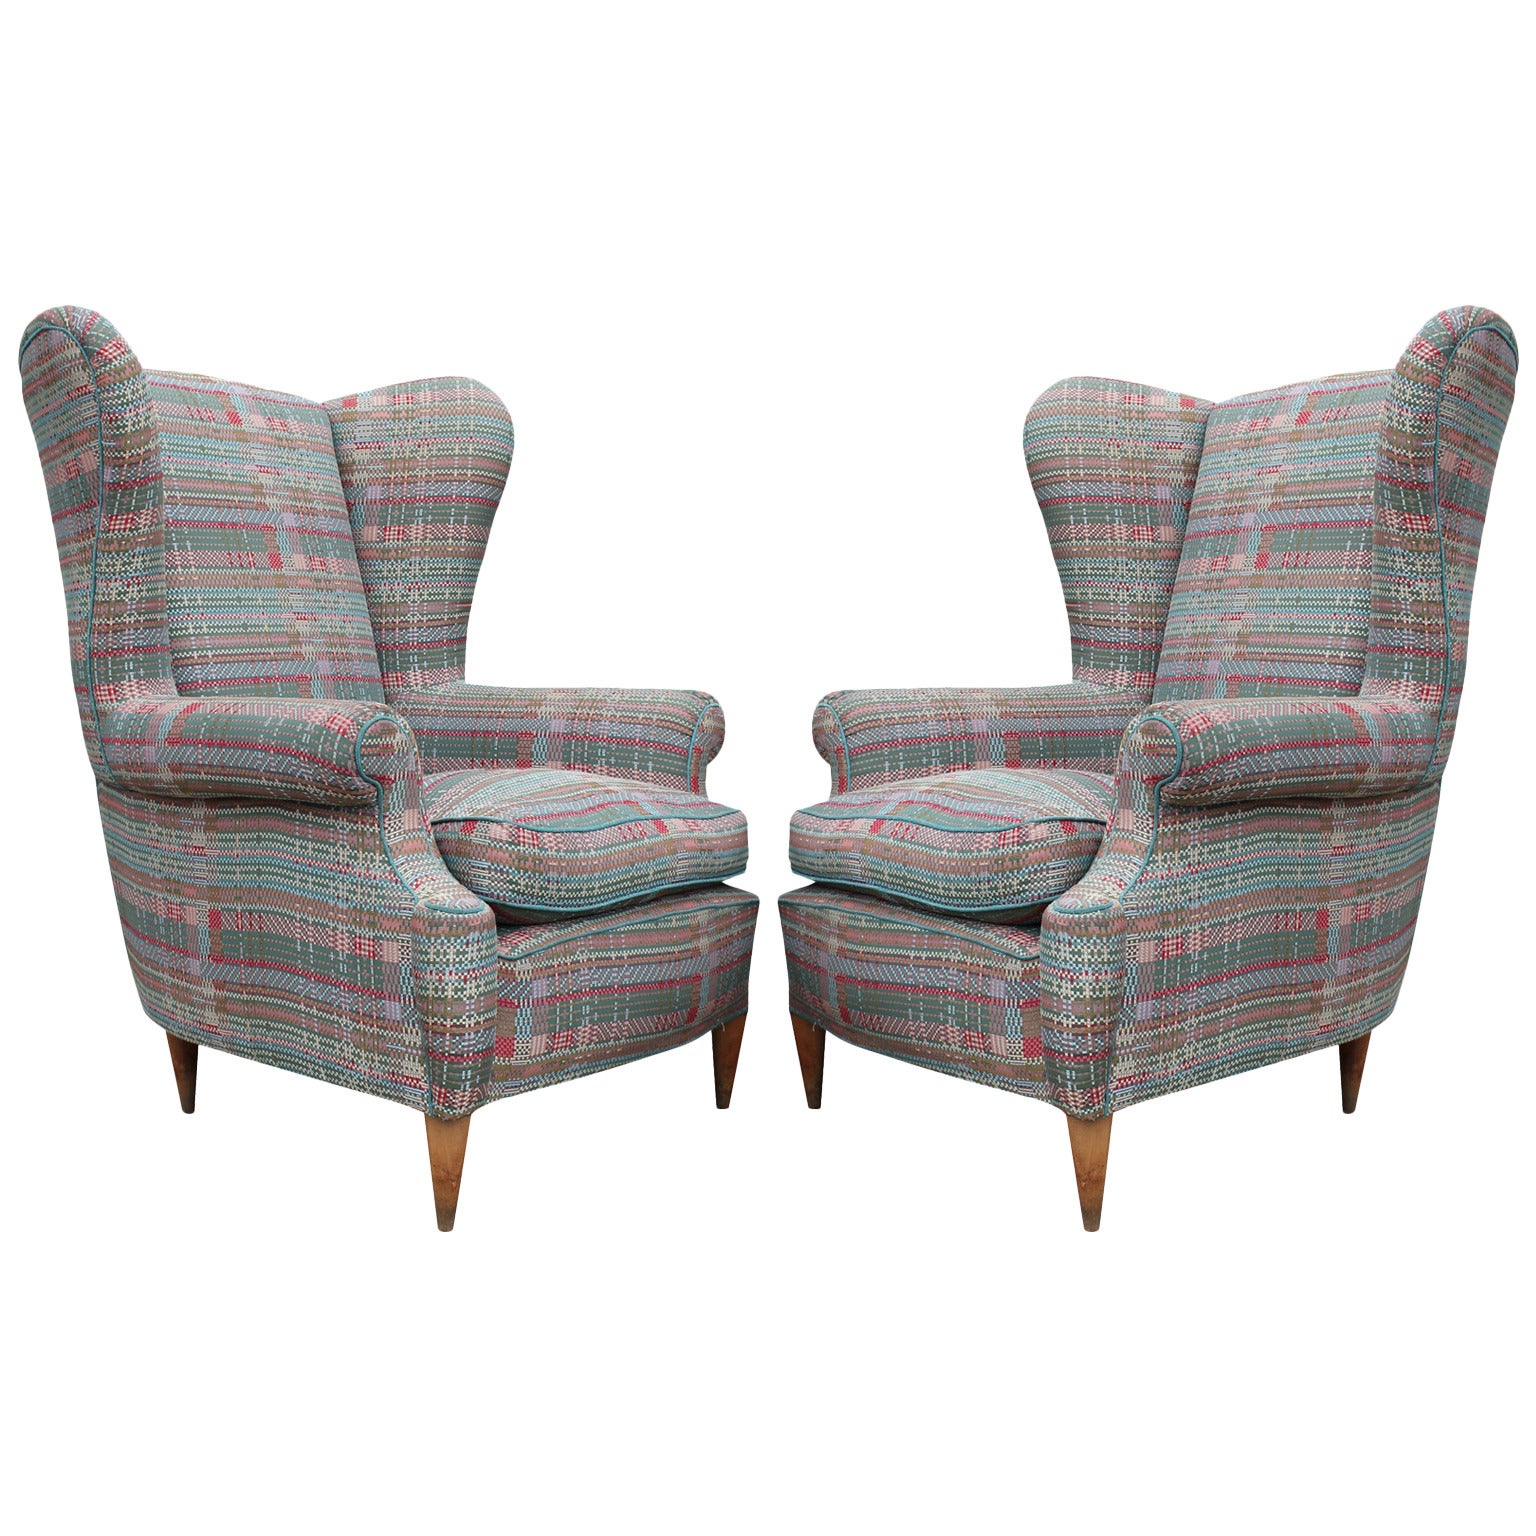 Gorgeous Pair of Mid-Century Modern Italian Wingback Lounge Chairs